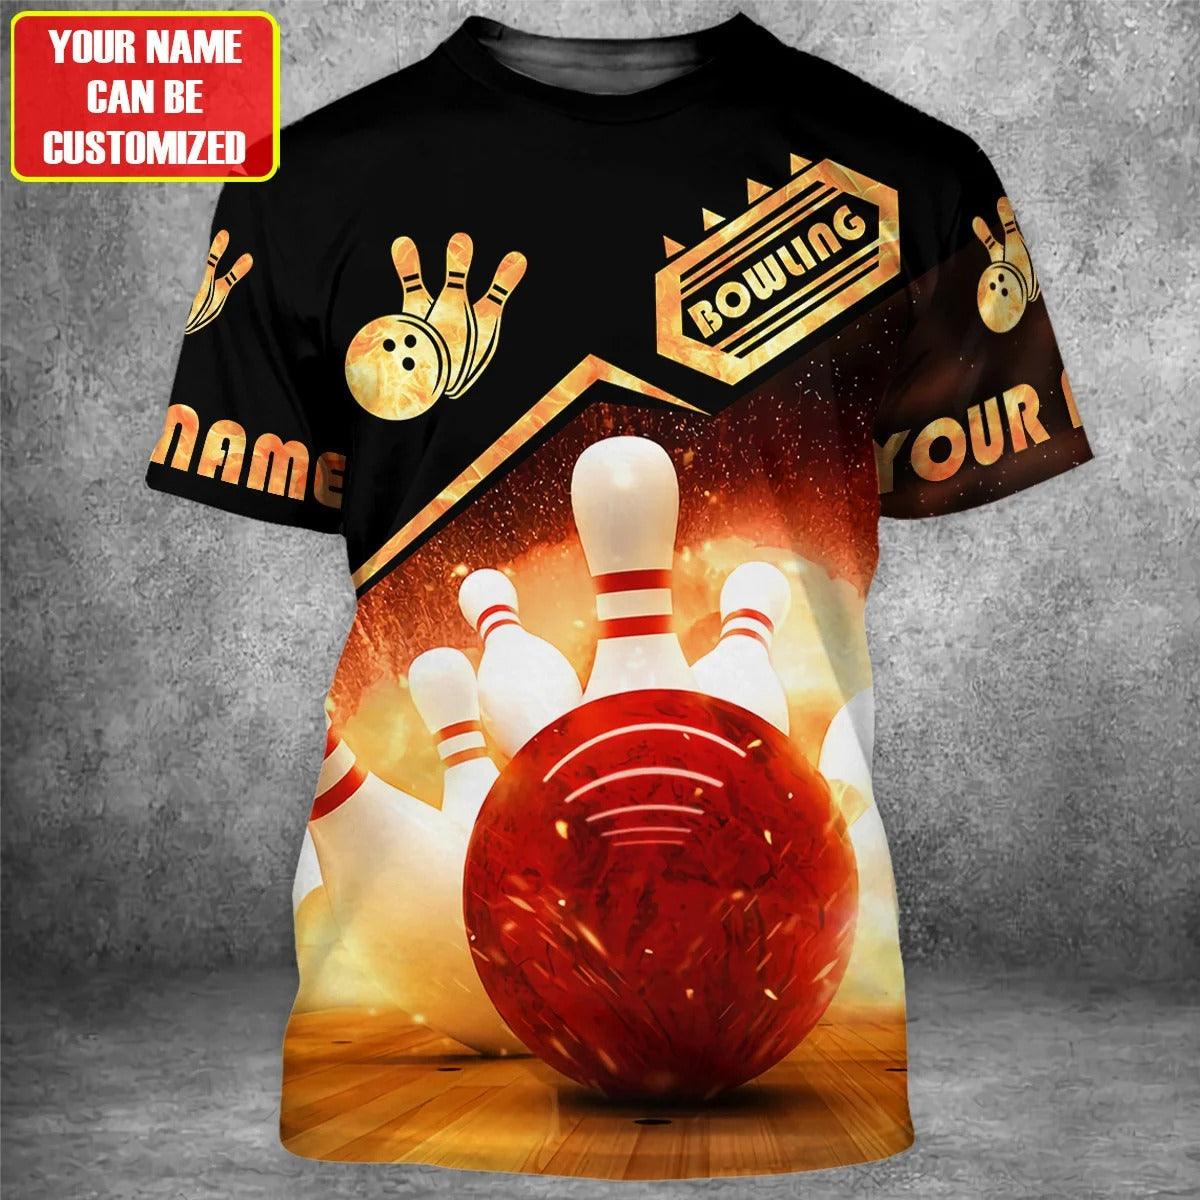 Customized Name Bowling T Shirt, Personalized Bowling Shirt For Men And Women, Bowling Team - Perfect Gift For Bowling Lovers - Amzanimalsgift